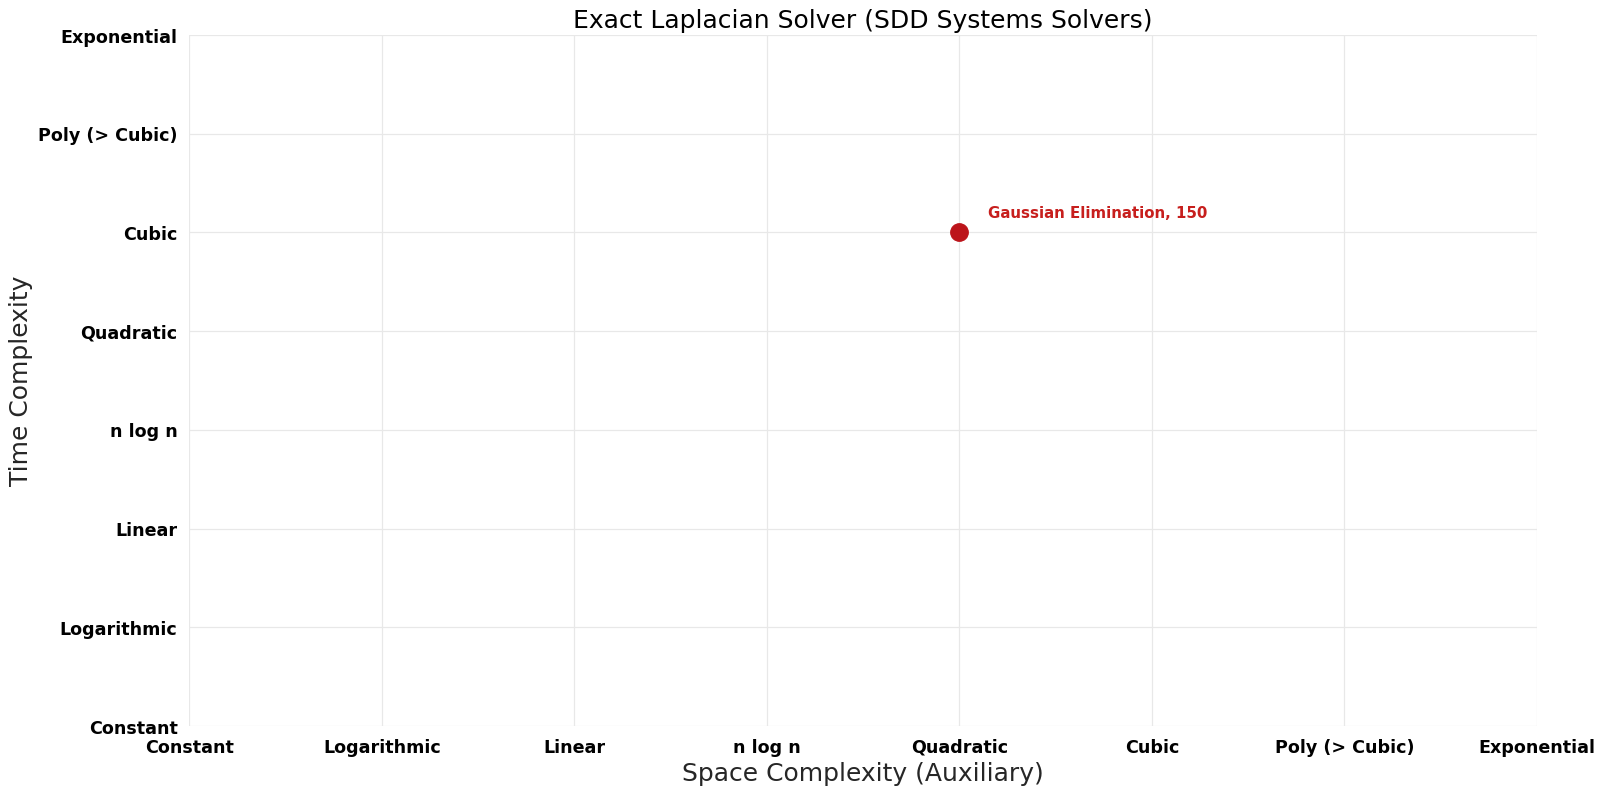 File:SDD Systems Solvers - Exact Laplacian Solver - Pareto Frontier.png